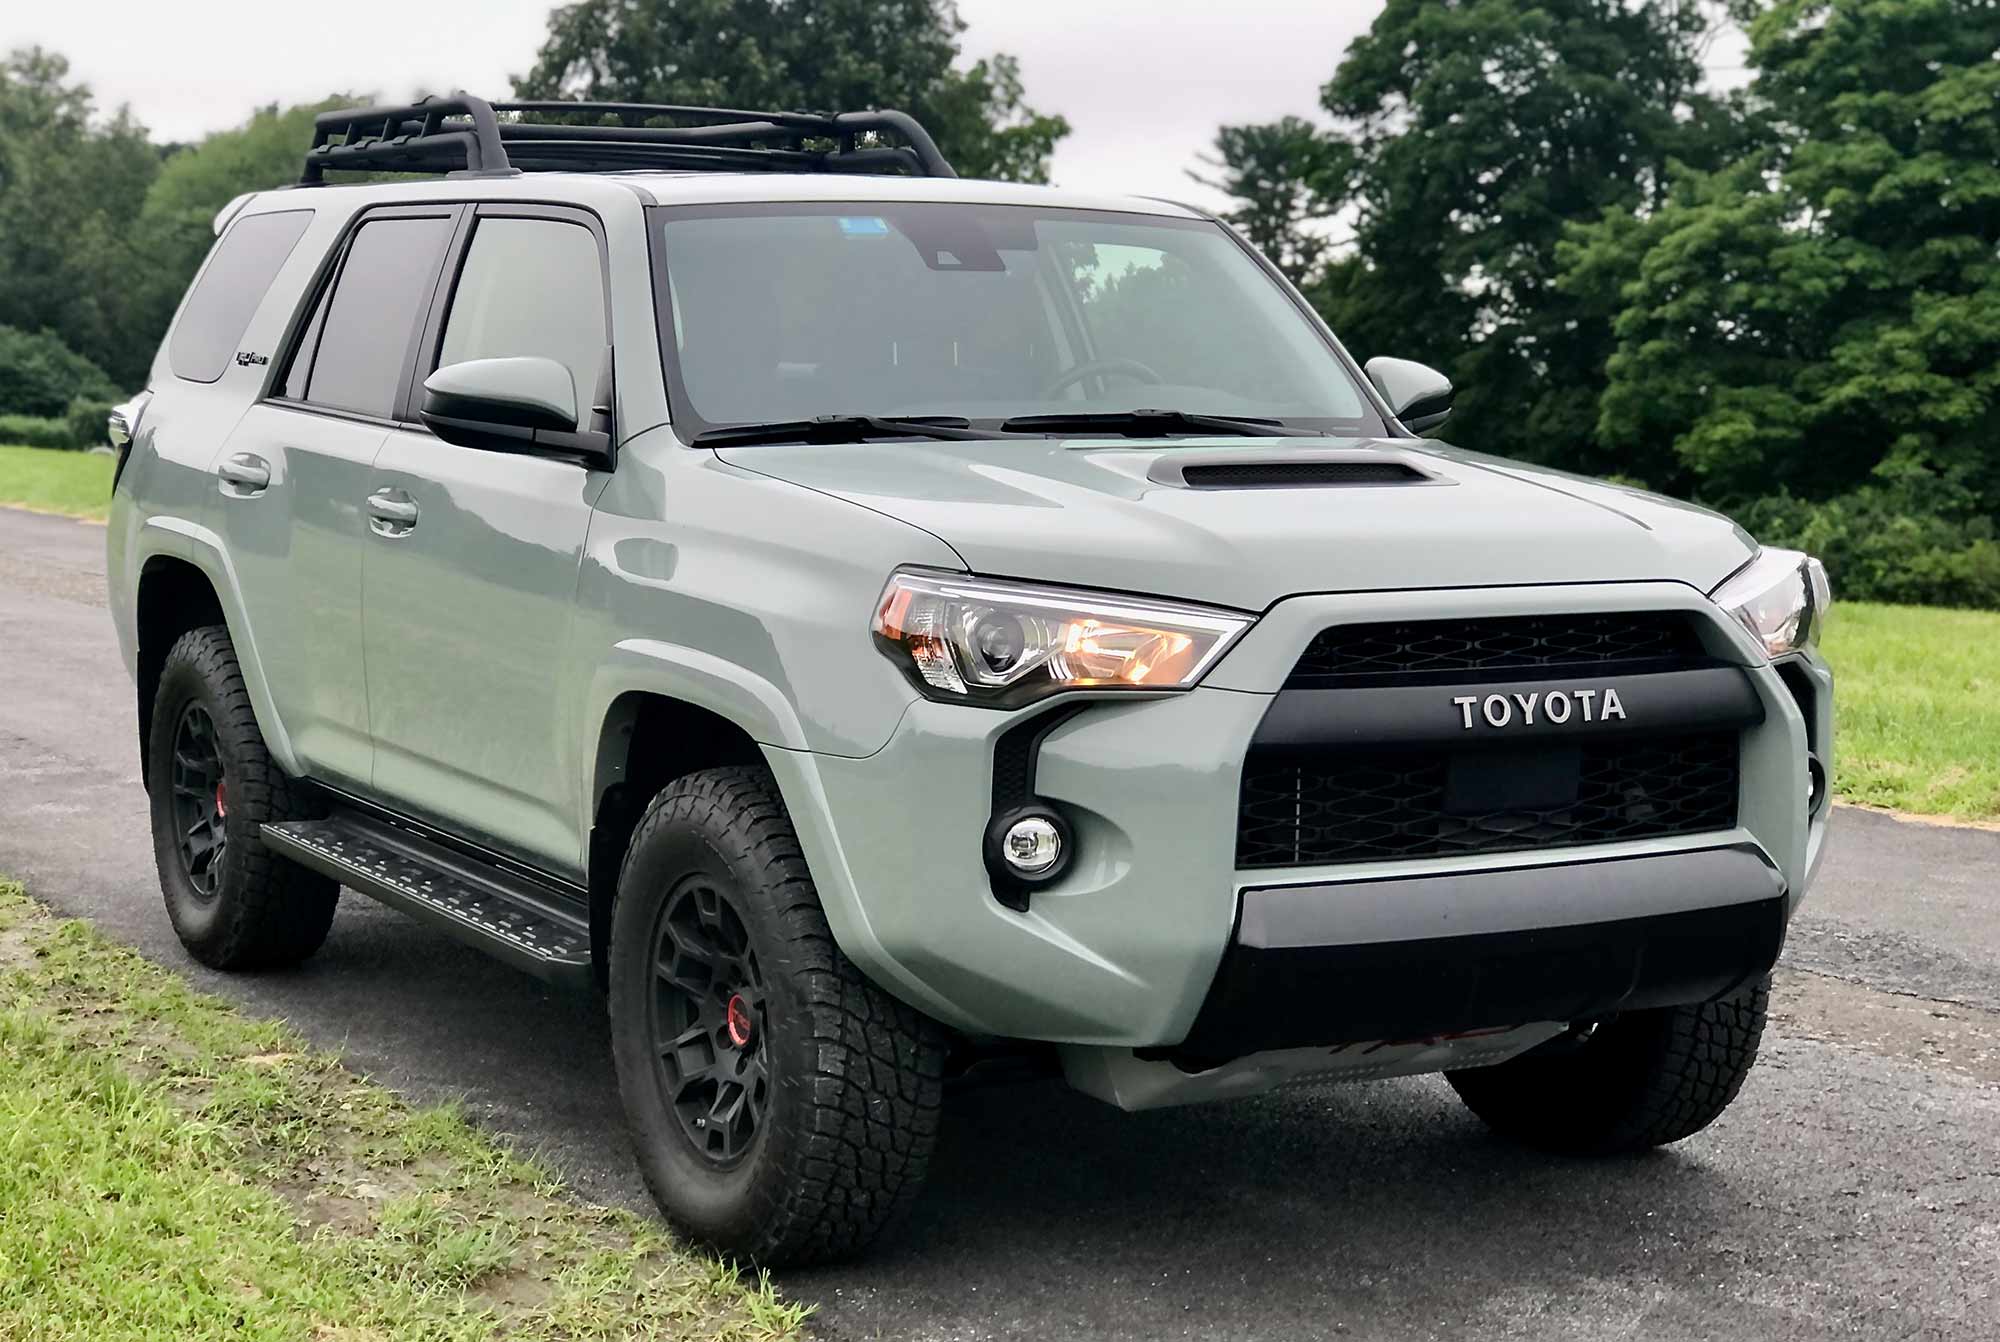 Alpine Armoring USA has produced an armored version of the Toyota 4Runner TRD.